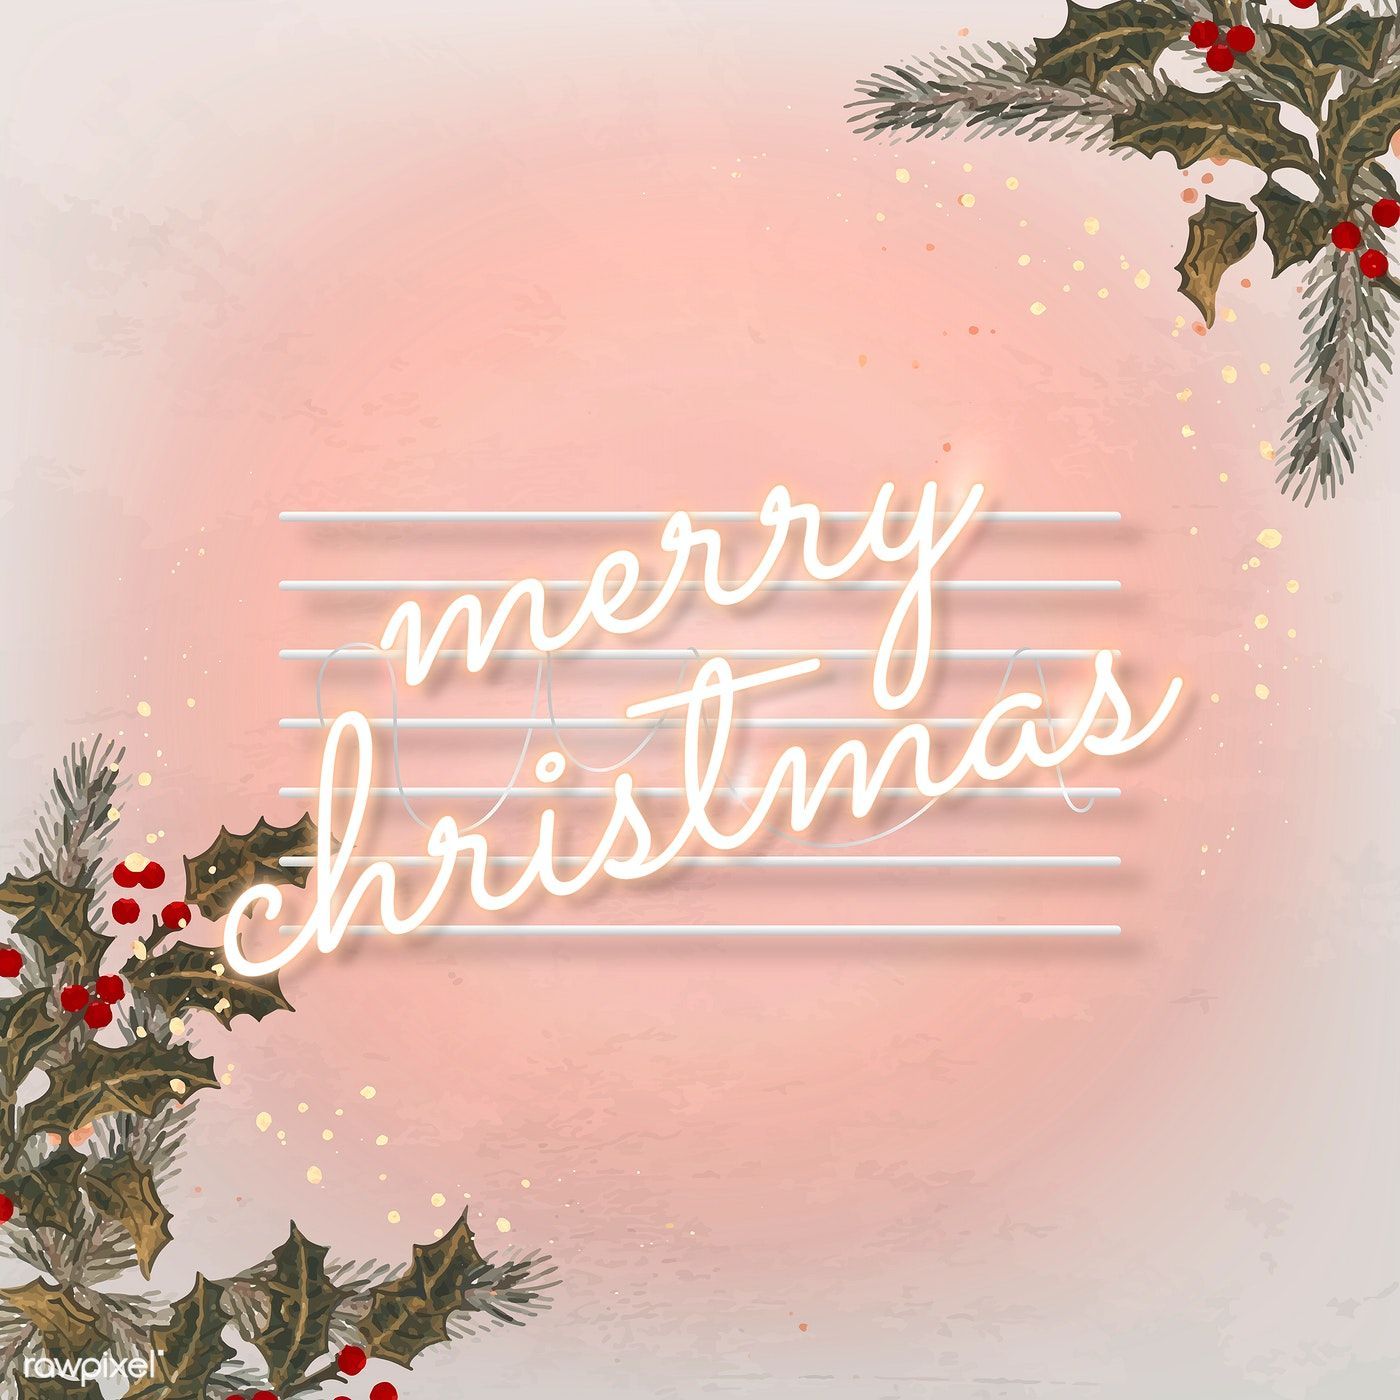 Download premium vector of Pink neon text with mistletoes social ads. Christmas card image, Xmas wallpaper, Social ads